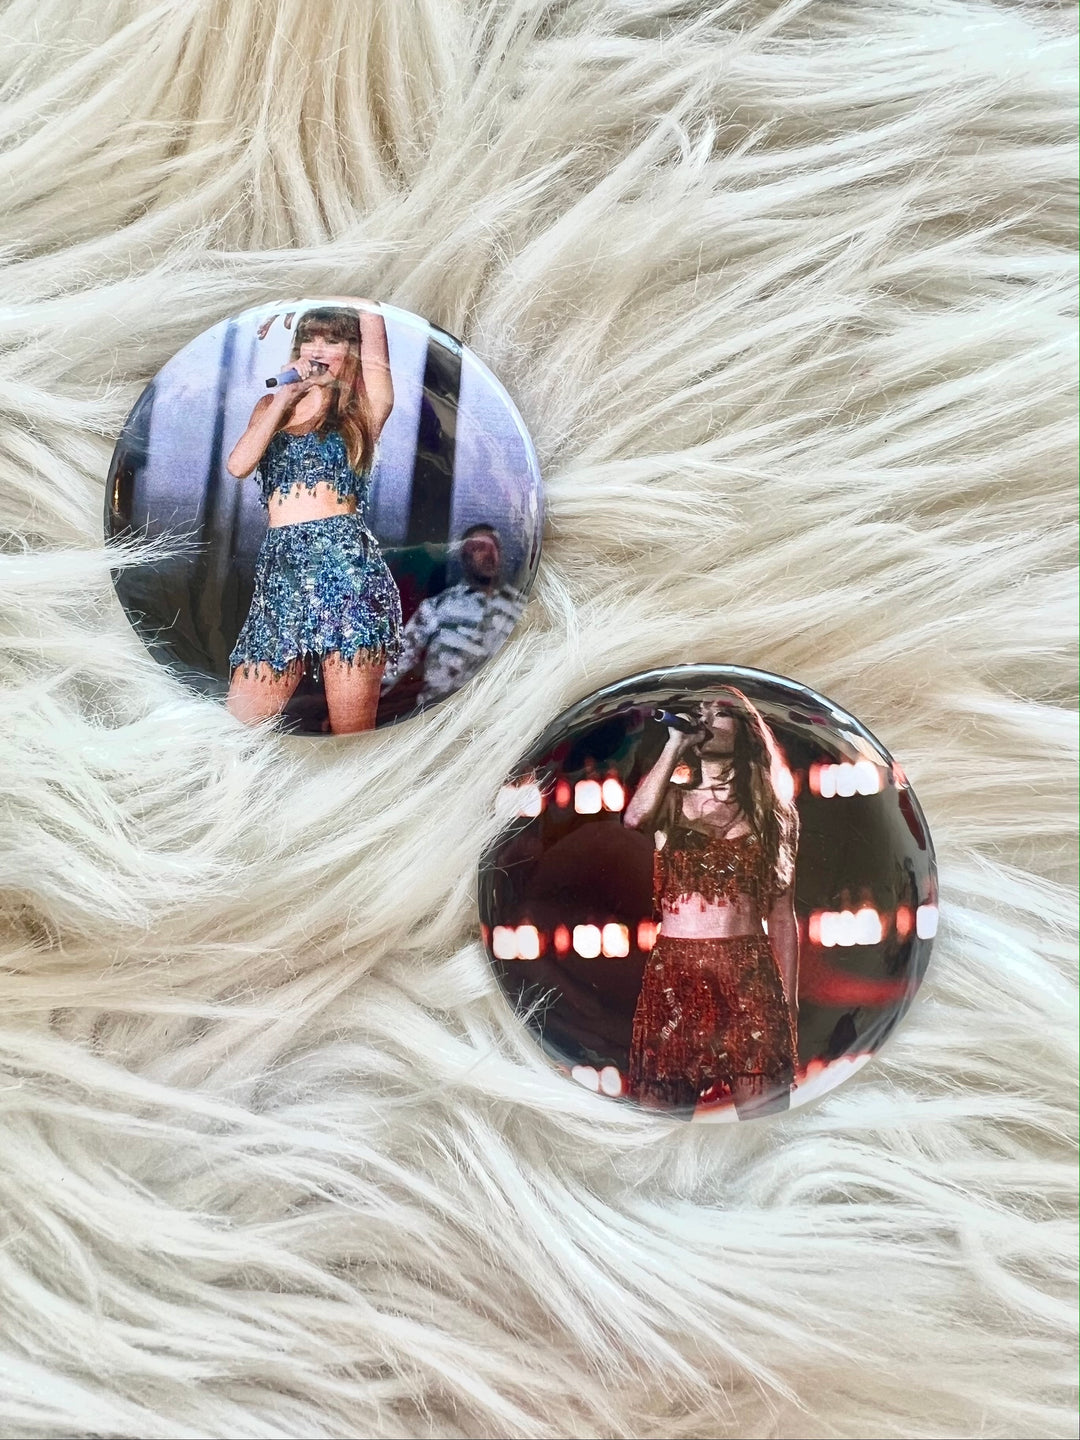 T Swift Gameday Button, Miscellaneous, Adeline, Adeline, dallas boutique, dallas texas, texas boutique, women's boutique dallas, adeline boutique, dallas boutique, trendy boutique, affordable boutique